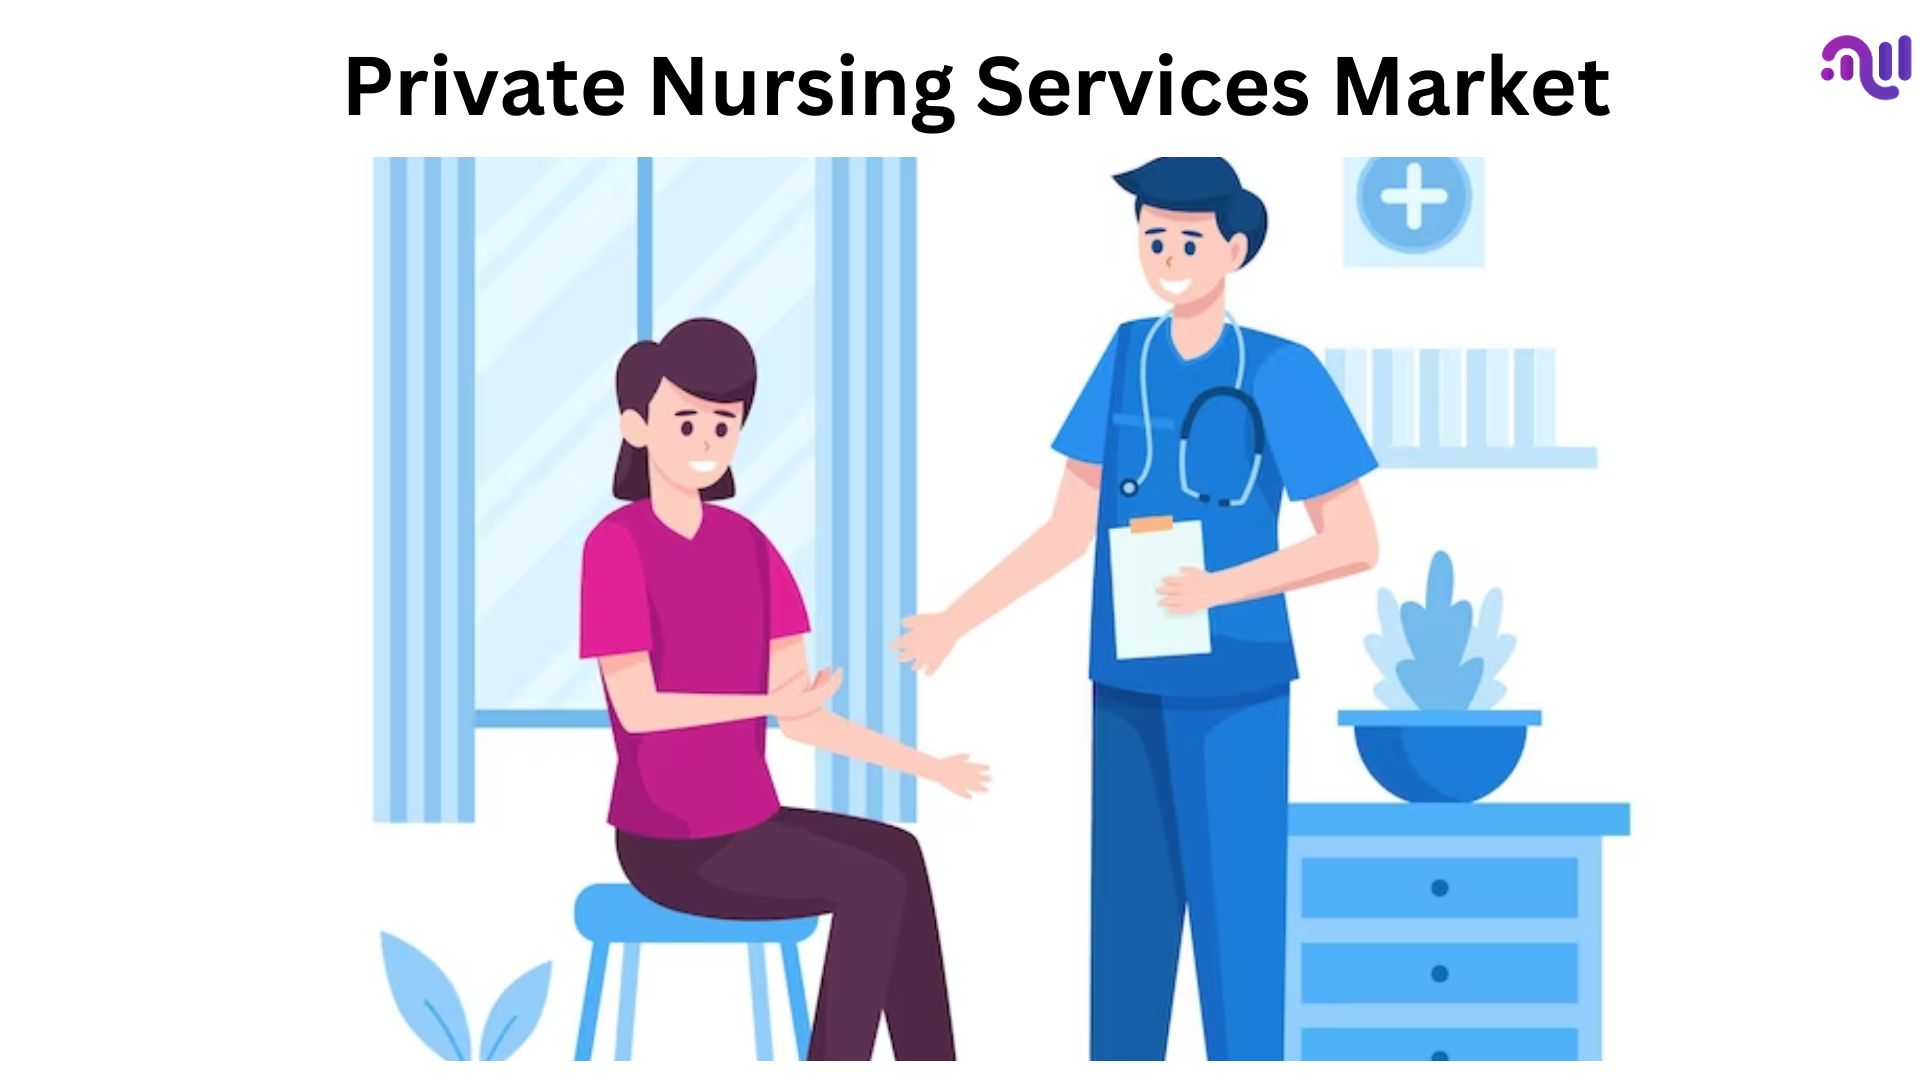 Private Nursing Services Market Is Predicted USD 1,179 Billion In Revenues By 2032 At CAGR of 7.0%